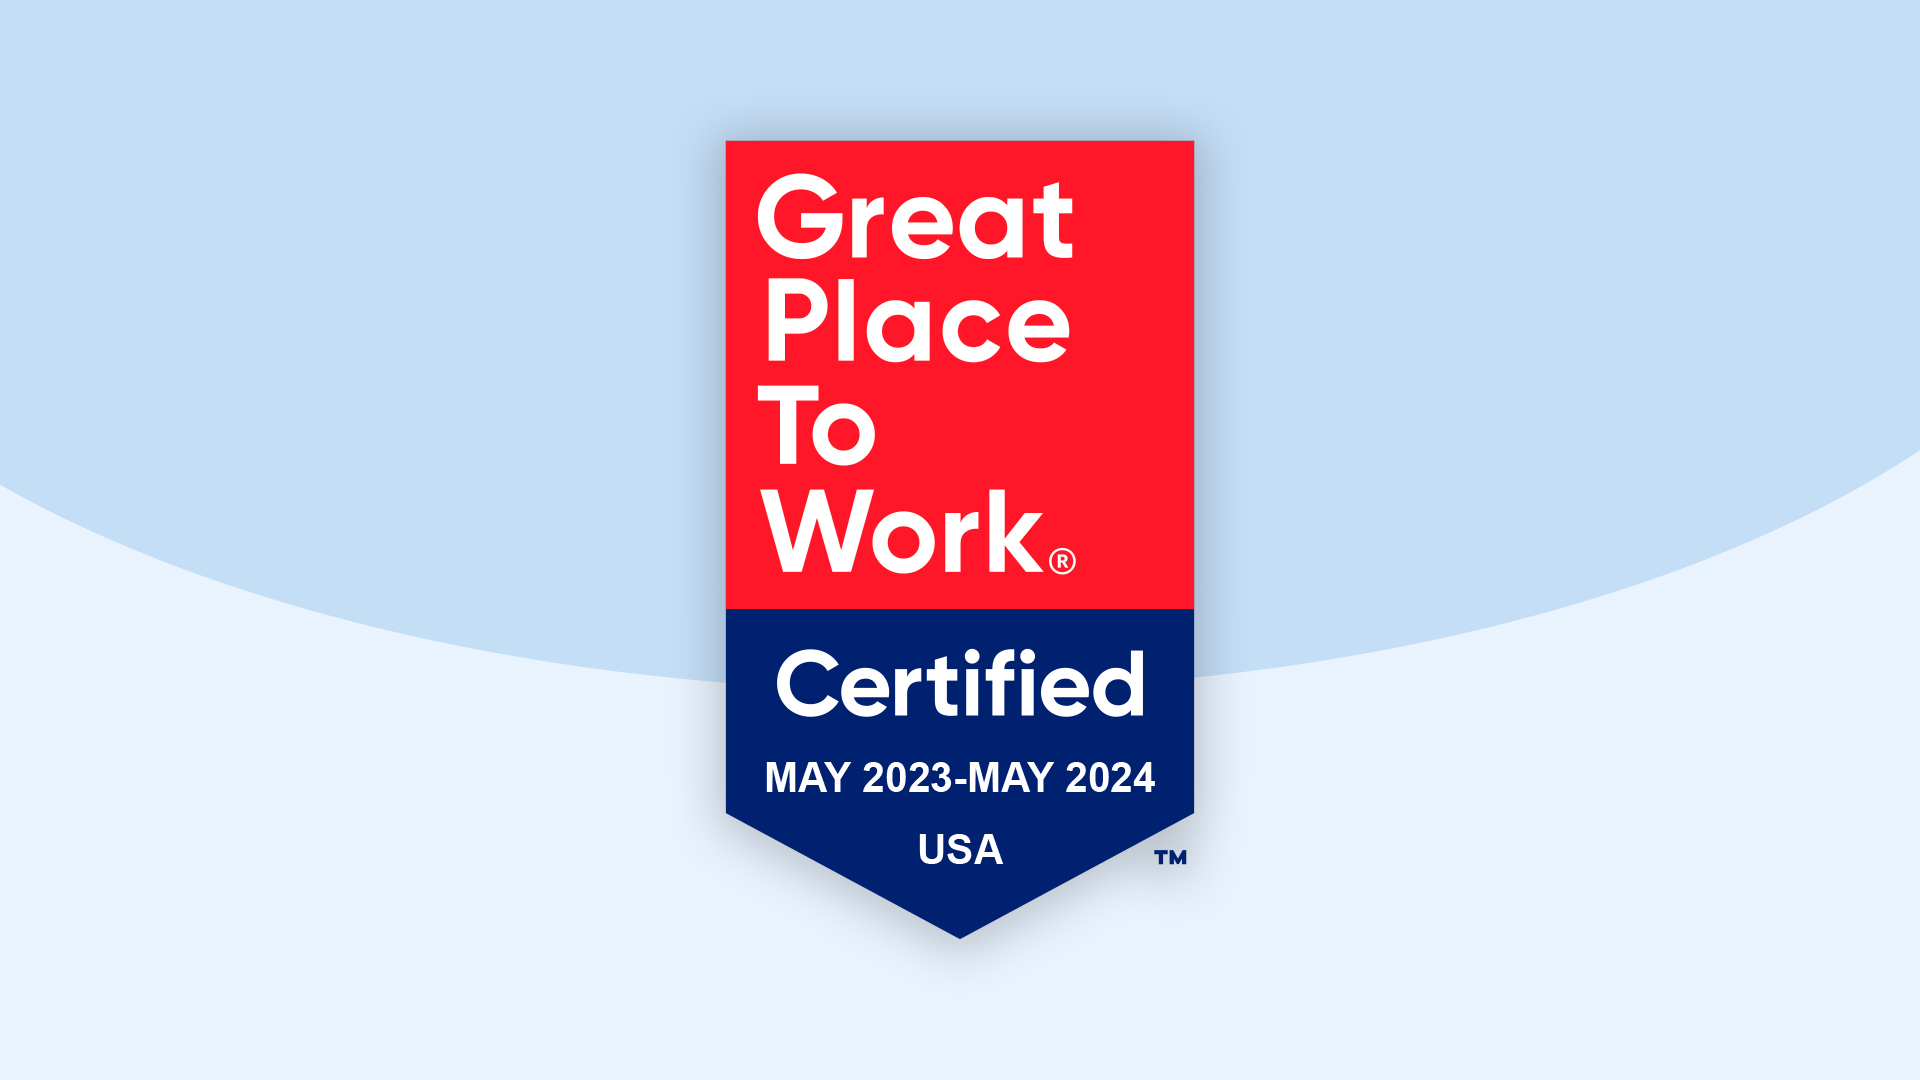 Walmart and Sam’s Club Both Certified as a Great Place to Work